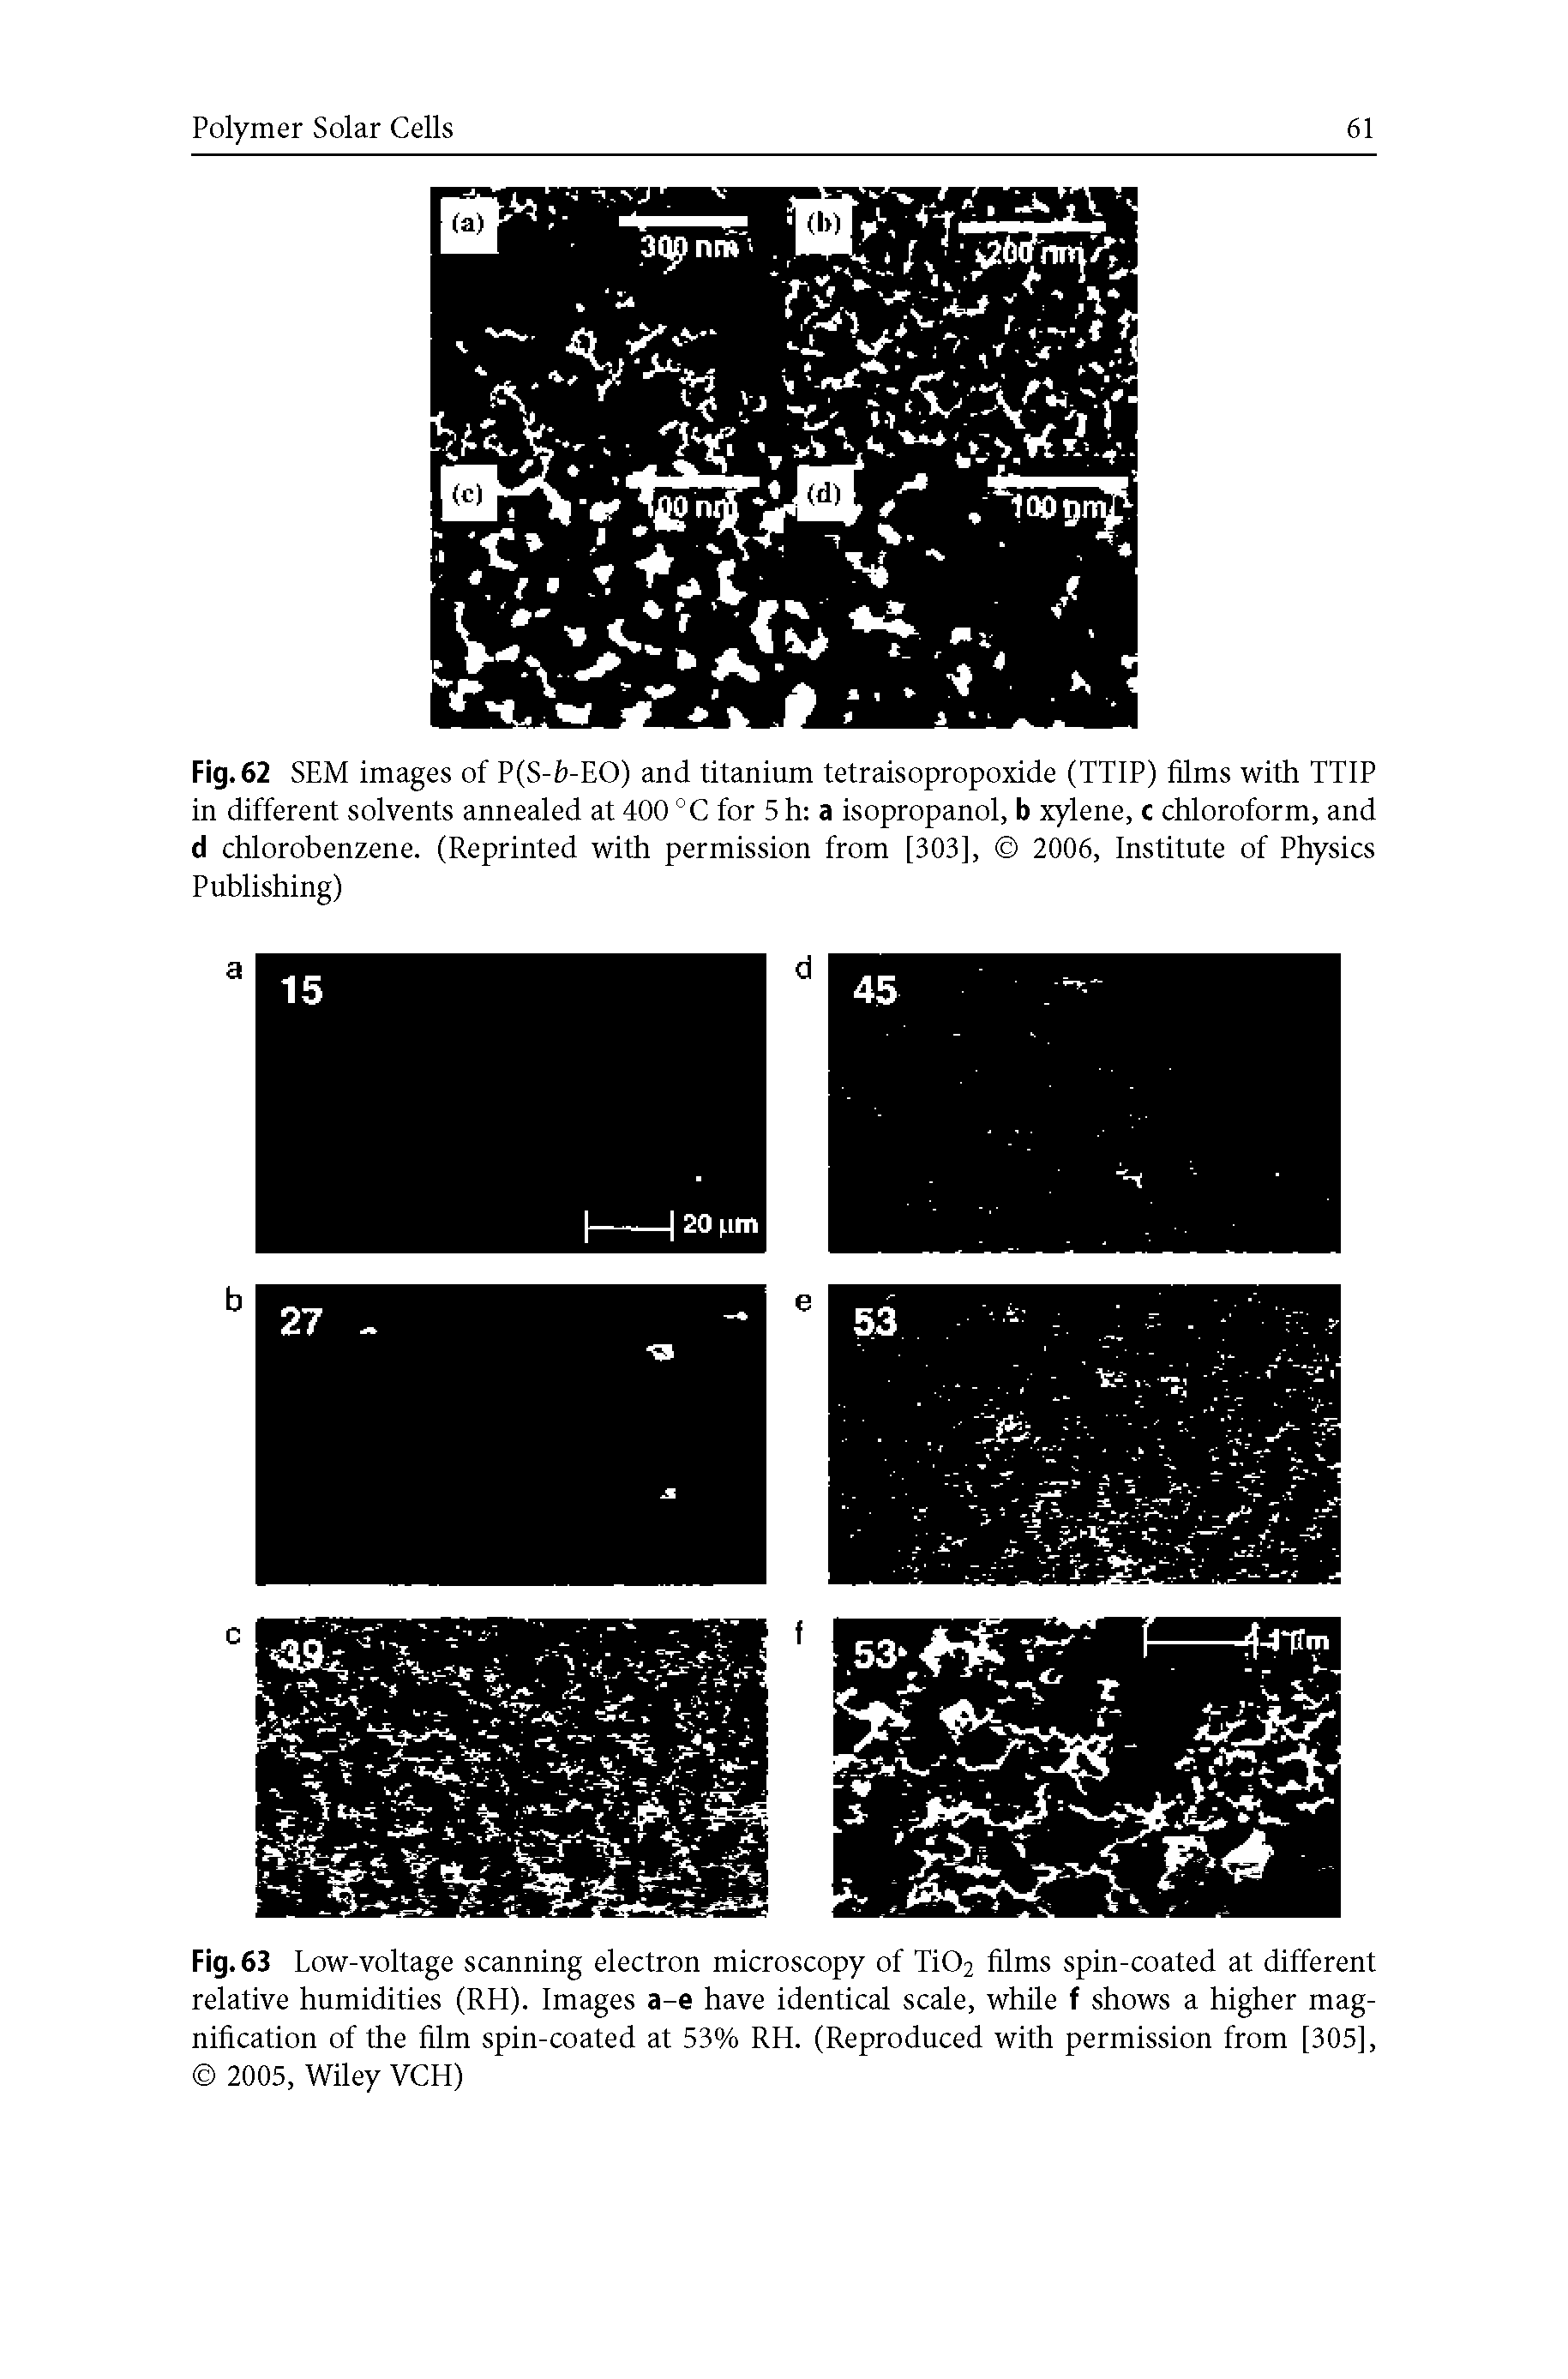 Fig. 63 Low-voltage scanning electron microscopy of Ti02 films spin-coated at different relative humidities (Rti). Images a-e have identical scale, while f shows a higher magnification of the film spin-coated at 53% Rti. (Reproduced with permission from [305], 2005, Wiley VCH)...